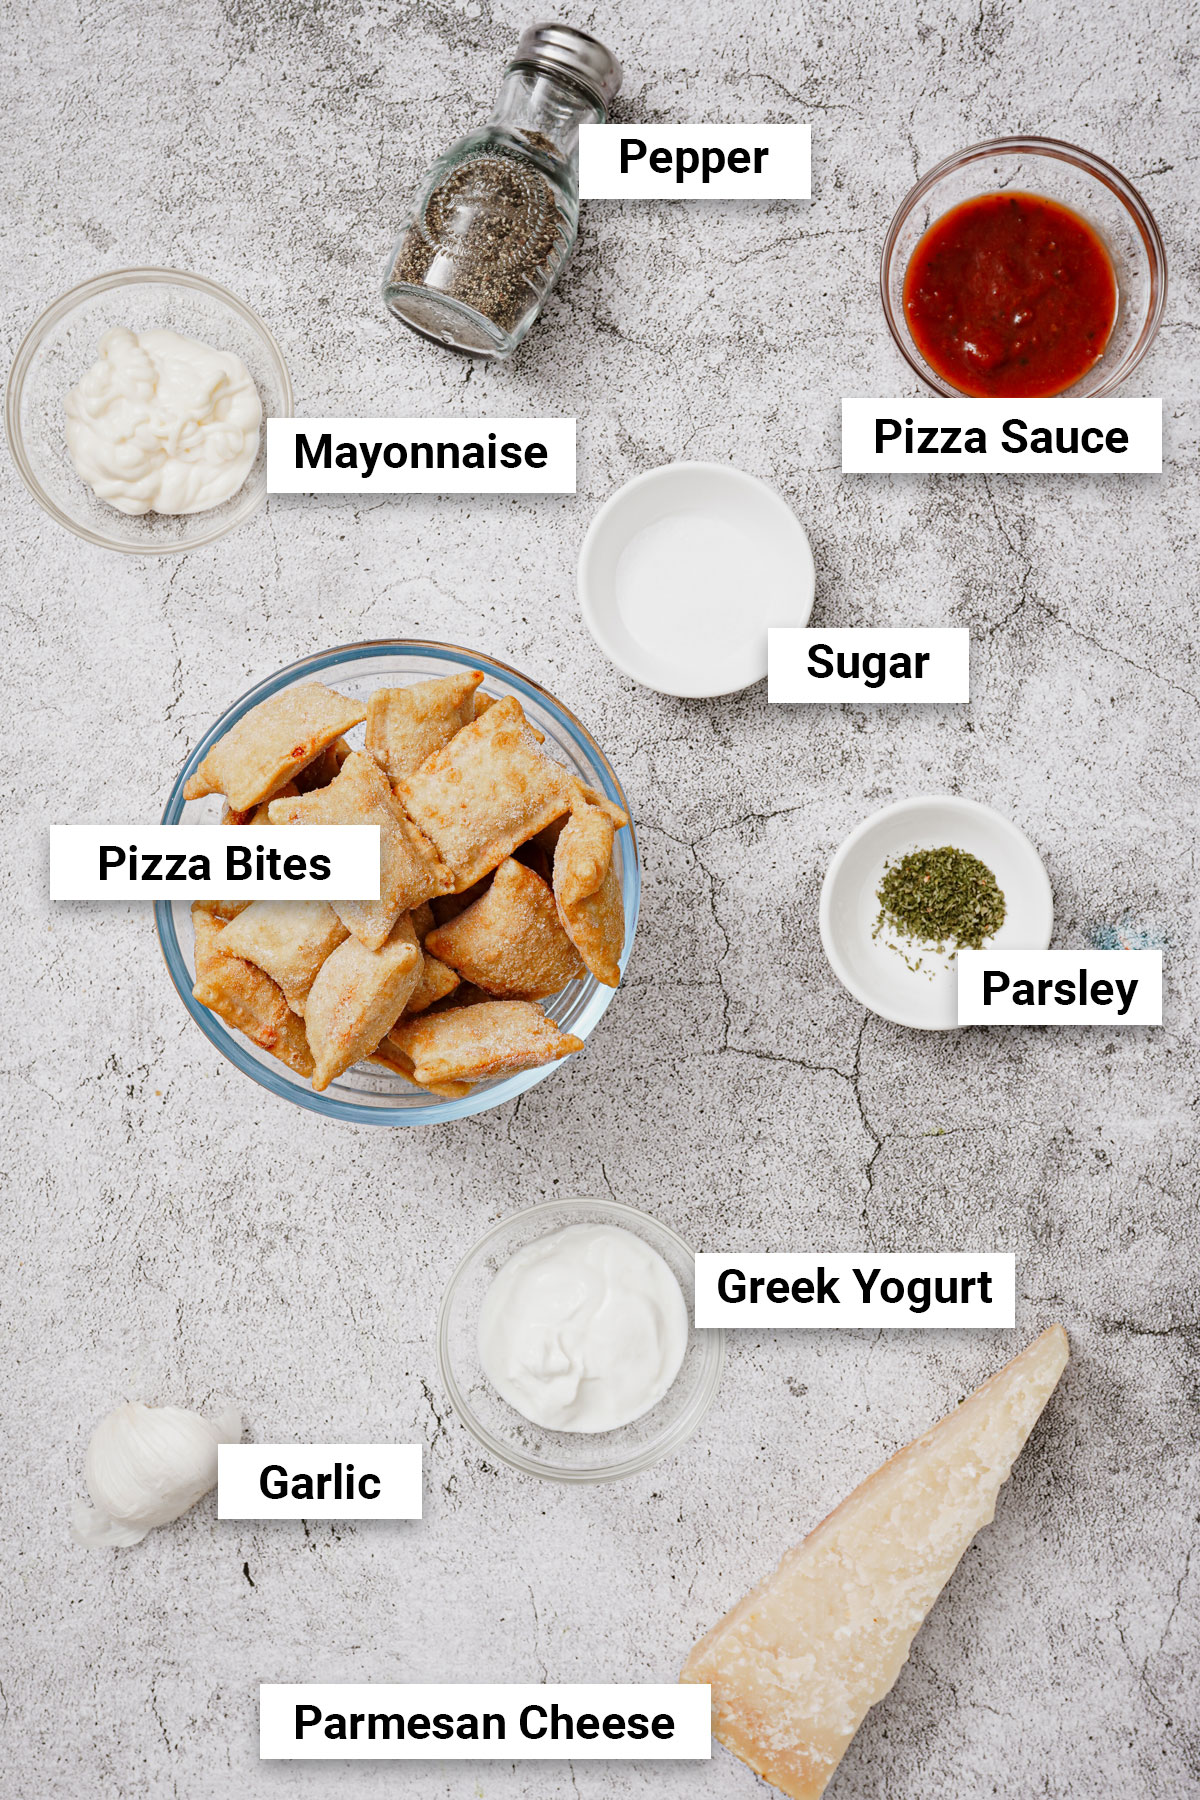 Ingredients for frozen pizza bites with dipping sauce.